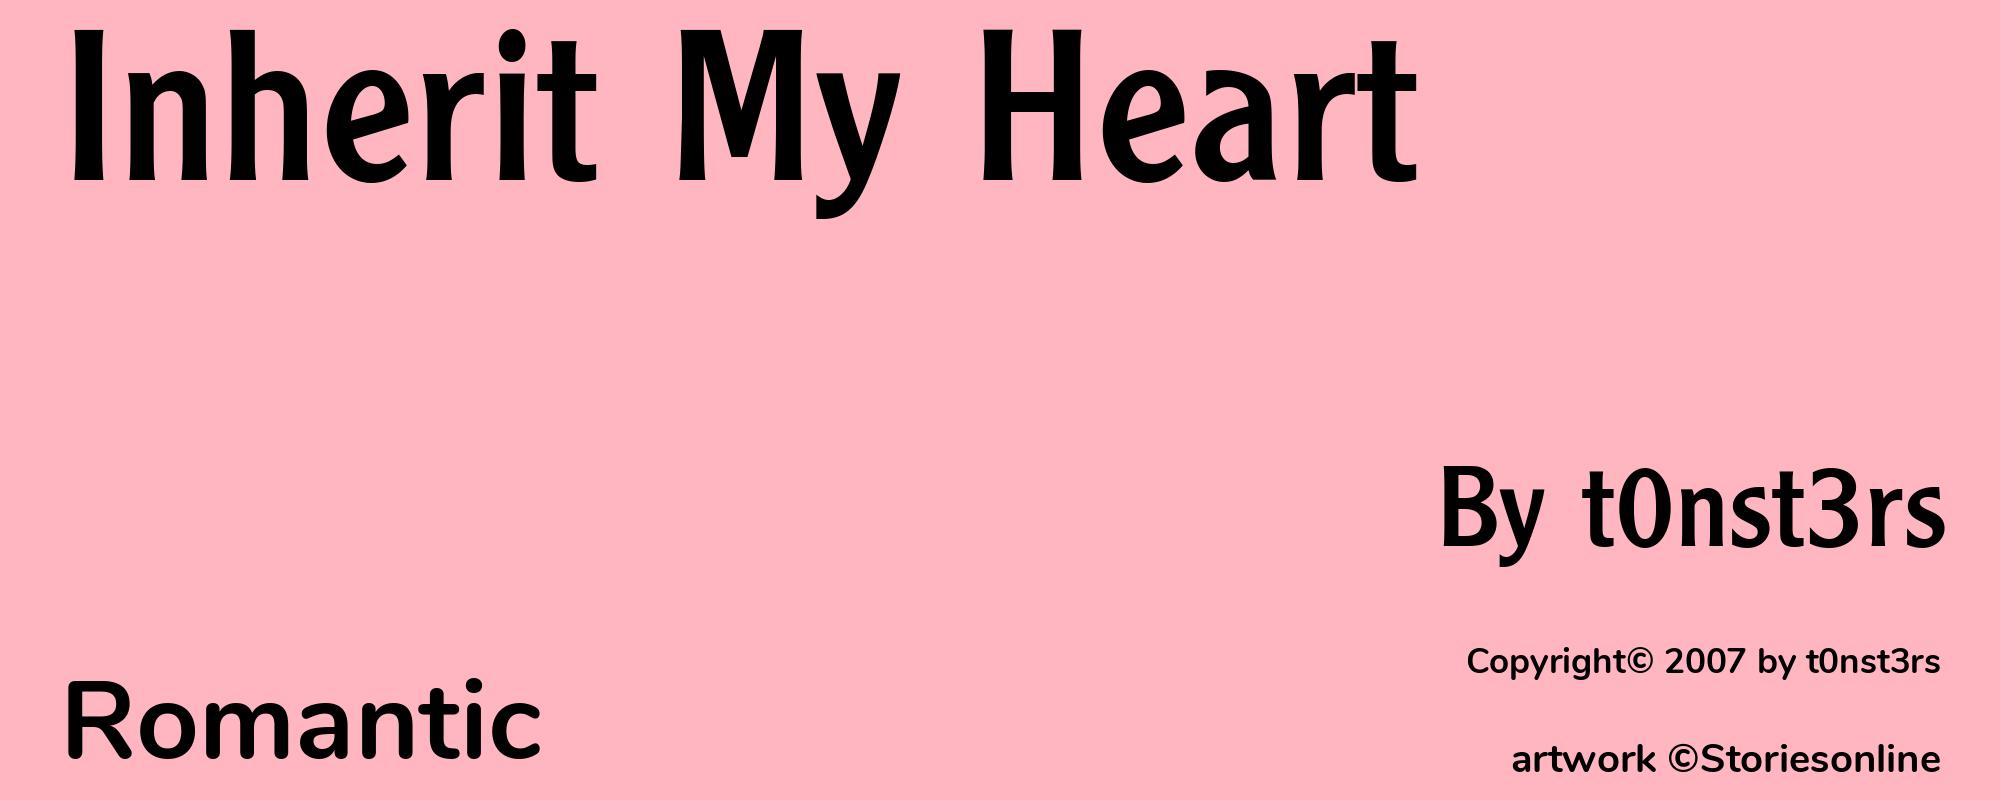 Inherit My Heart - Cover